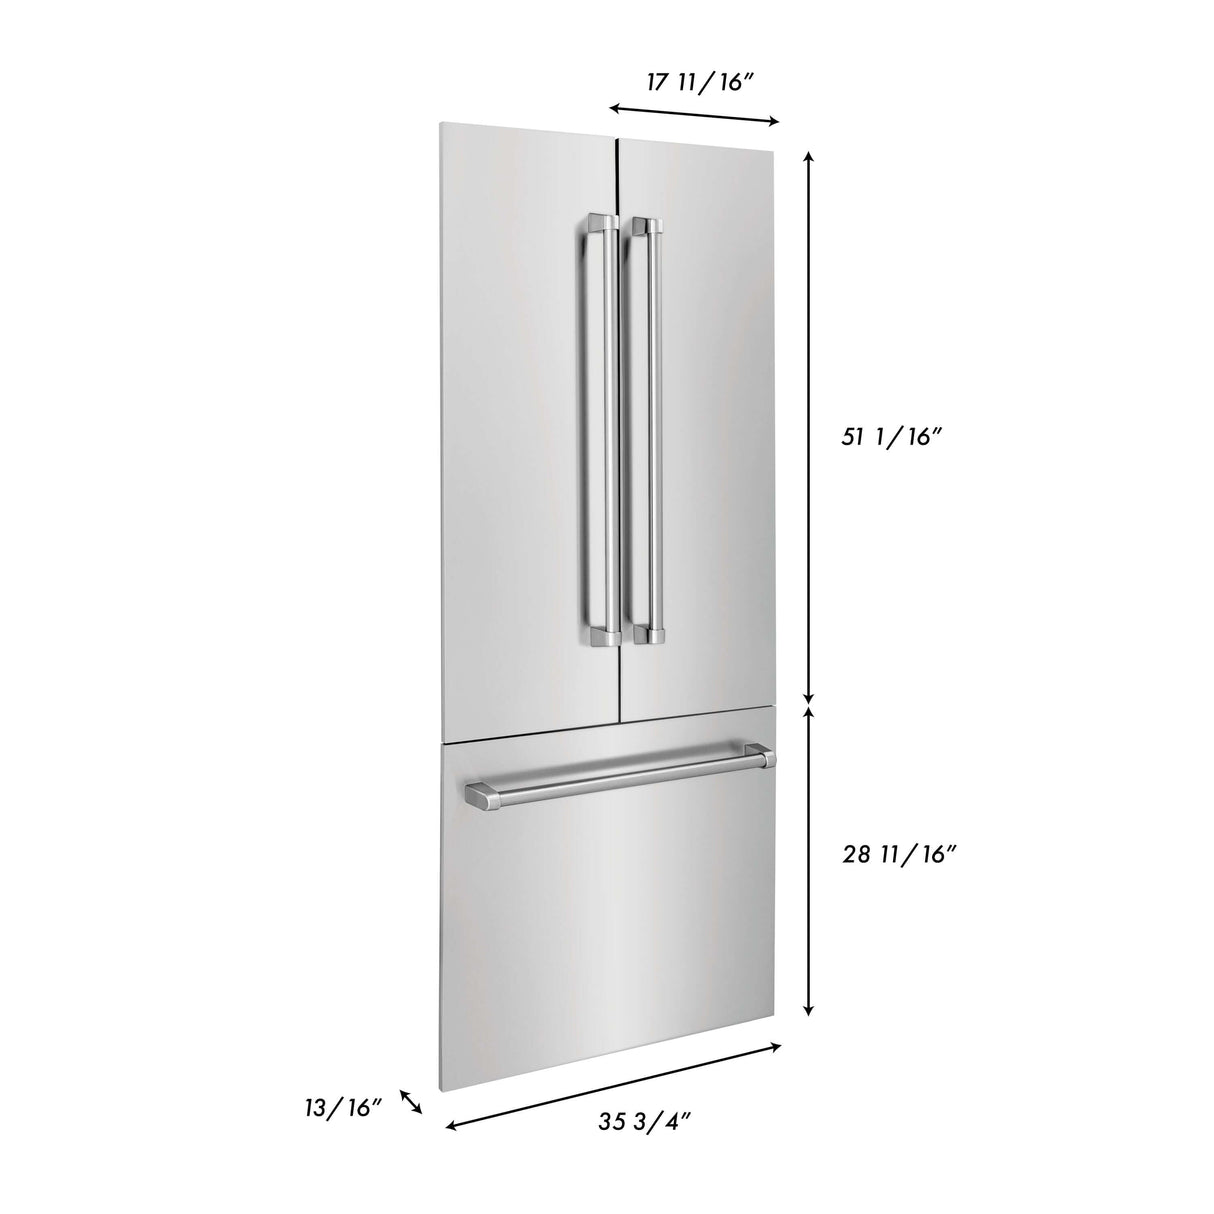 ZLINE 36 in. Refrigerator Panels and Handles in Stainless Steel for Built-in Refrigerators (RPBIV-304-36)